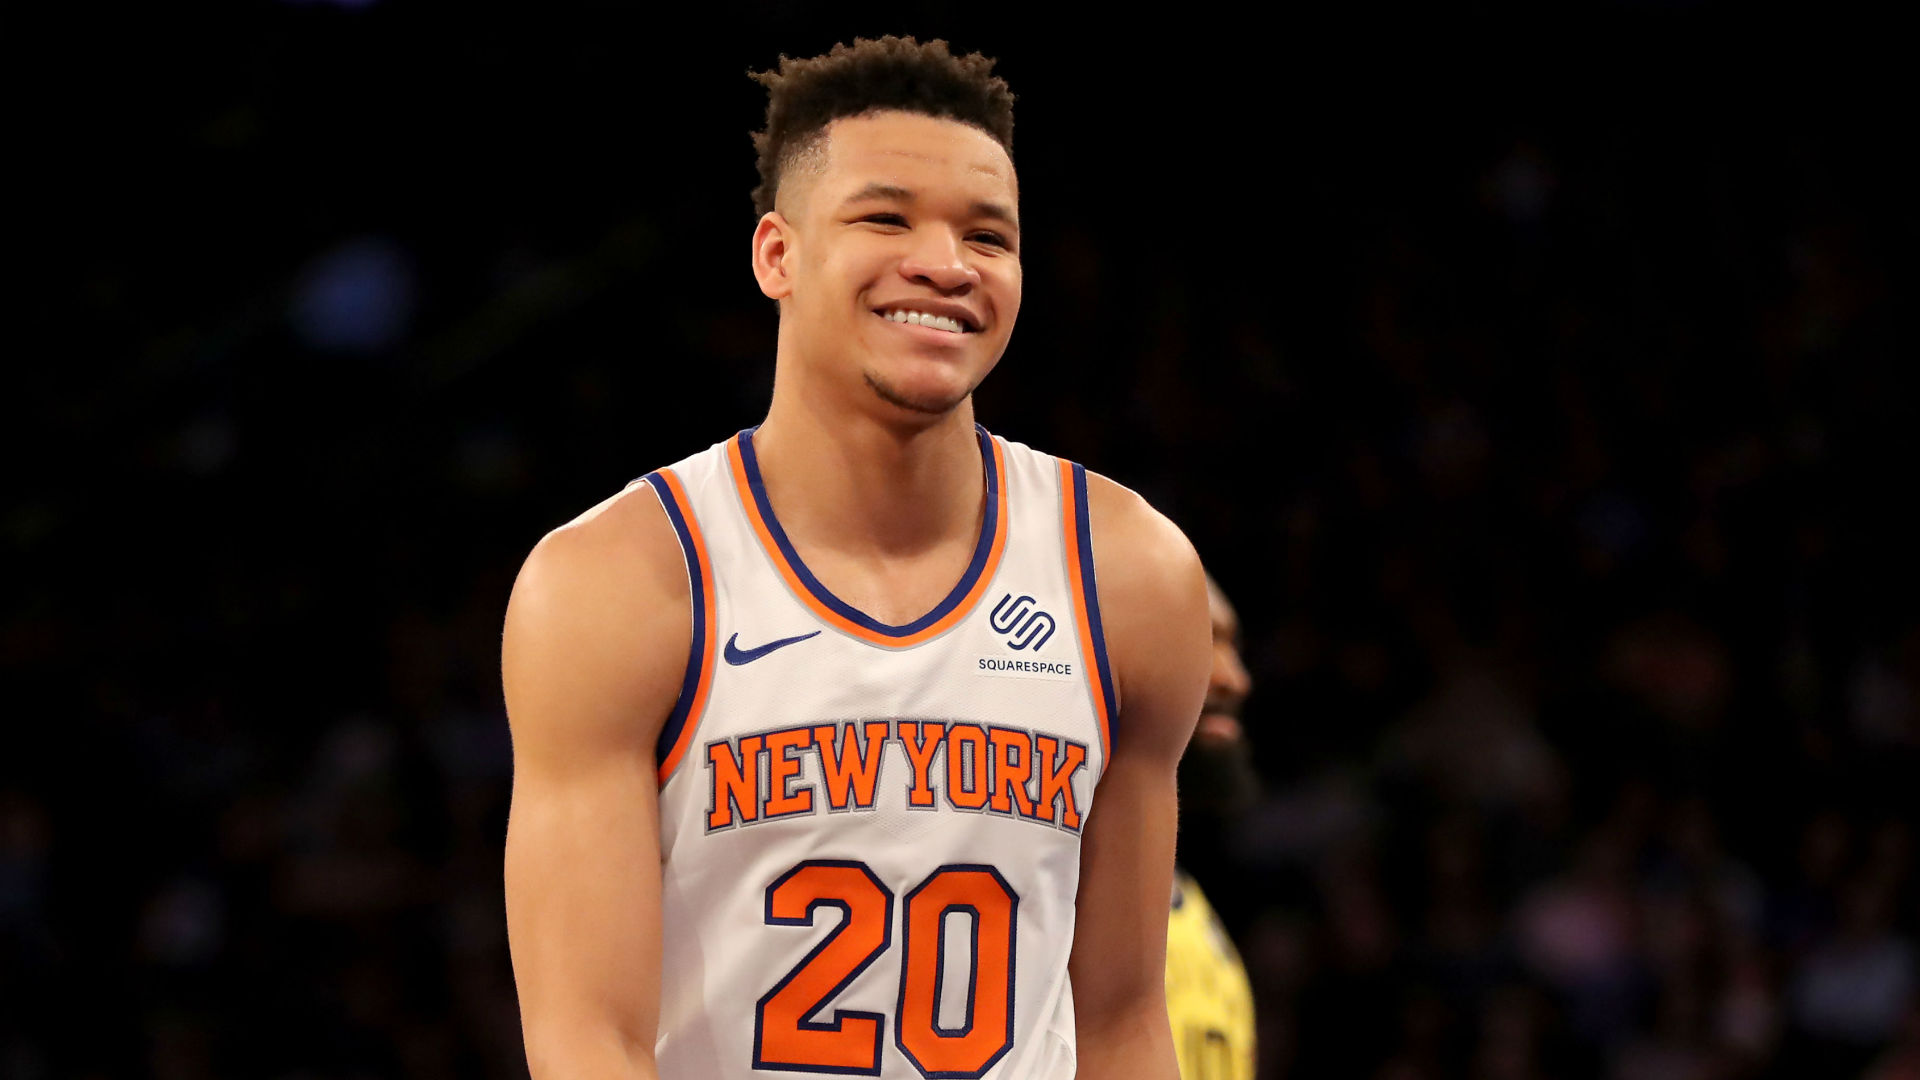 NBA rumors: Pelicans checked in on Knicks' Kevin Knox | Sporting News1920 x 1080